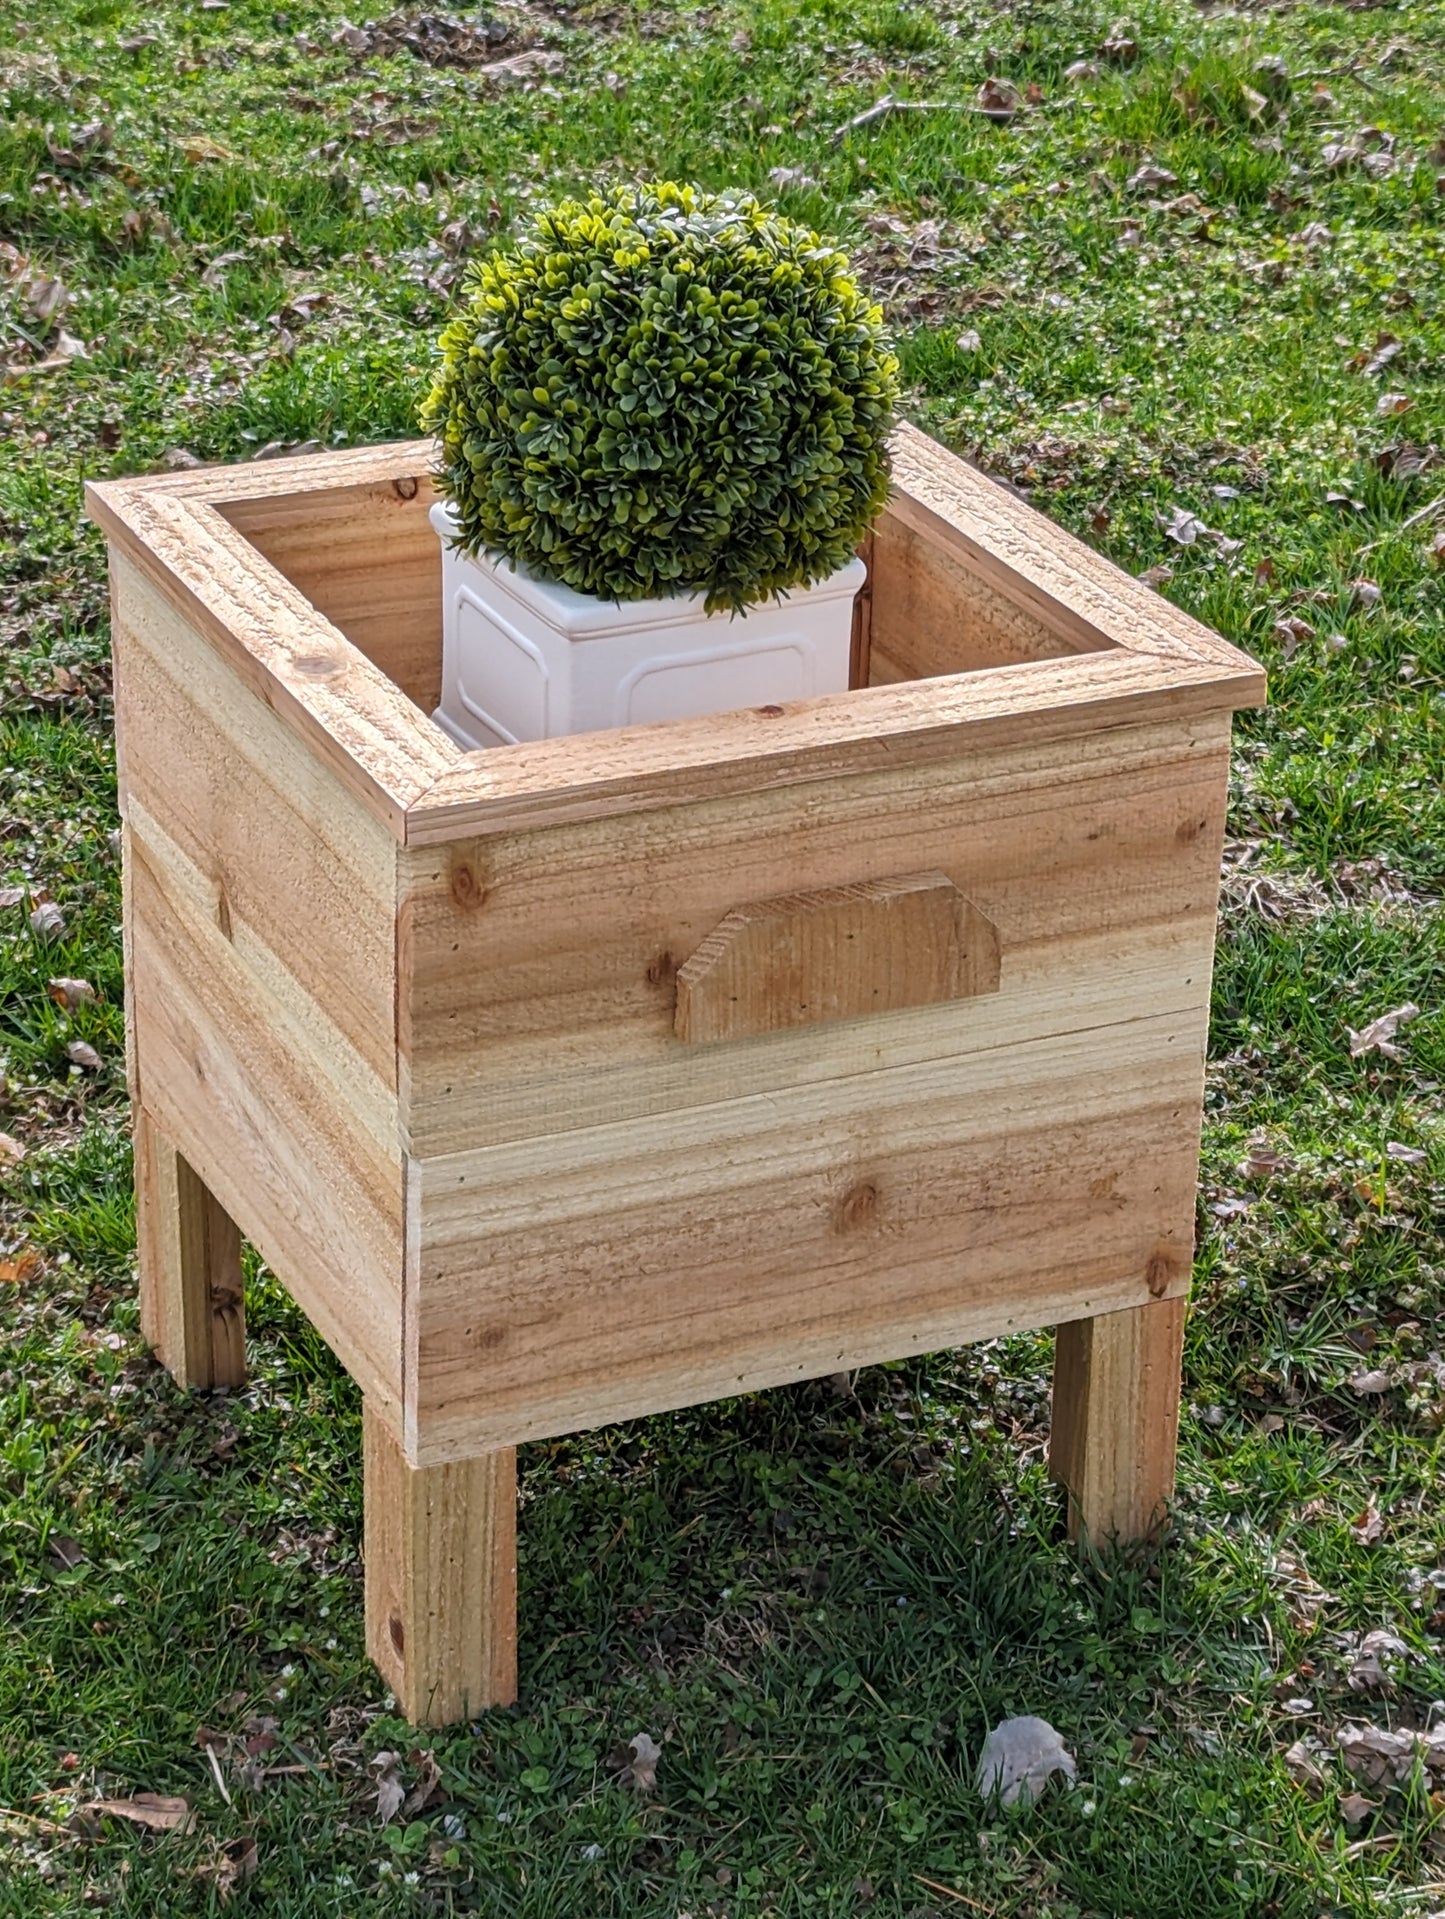 Planter box small square for patio or deck with bottom all cedar